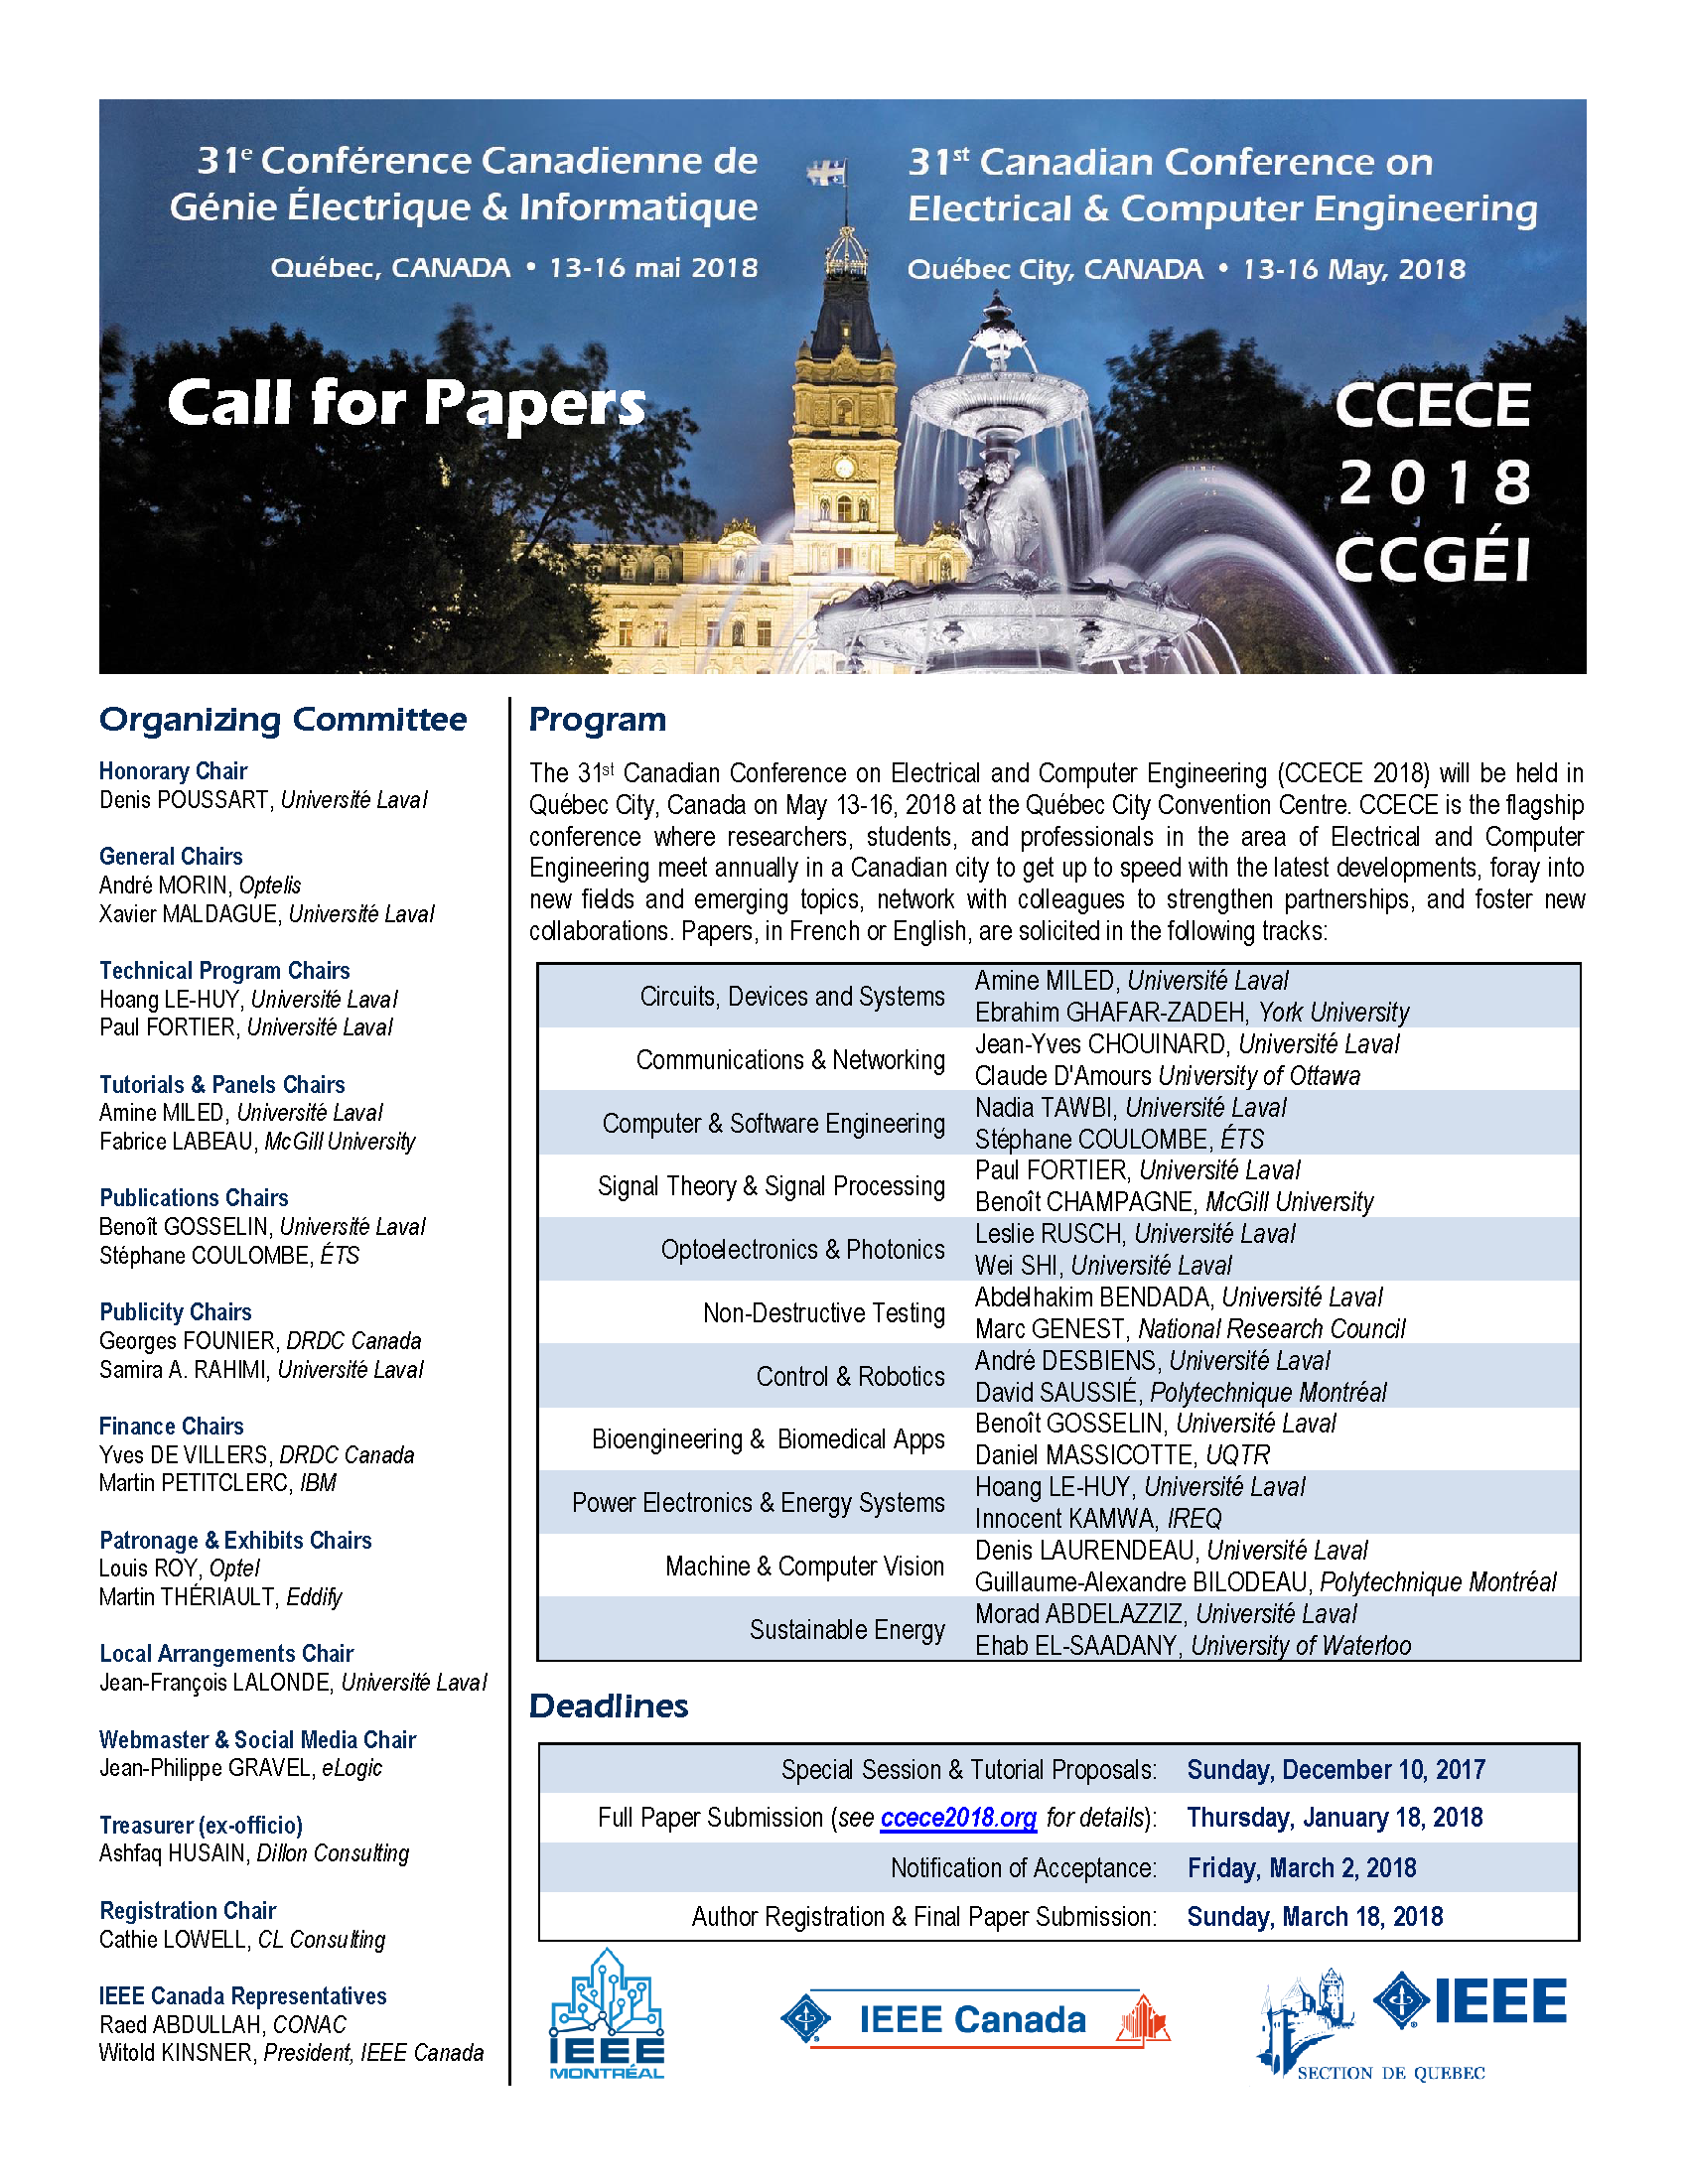 CCECE 2018 Call for Papers - English version